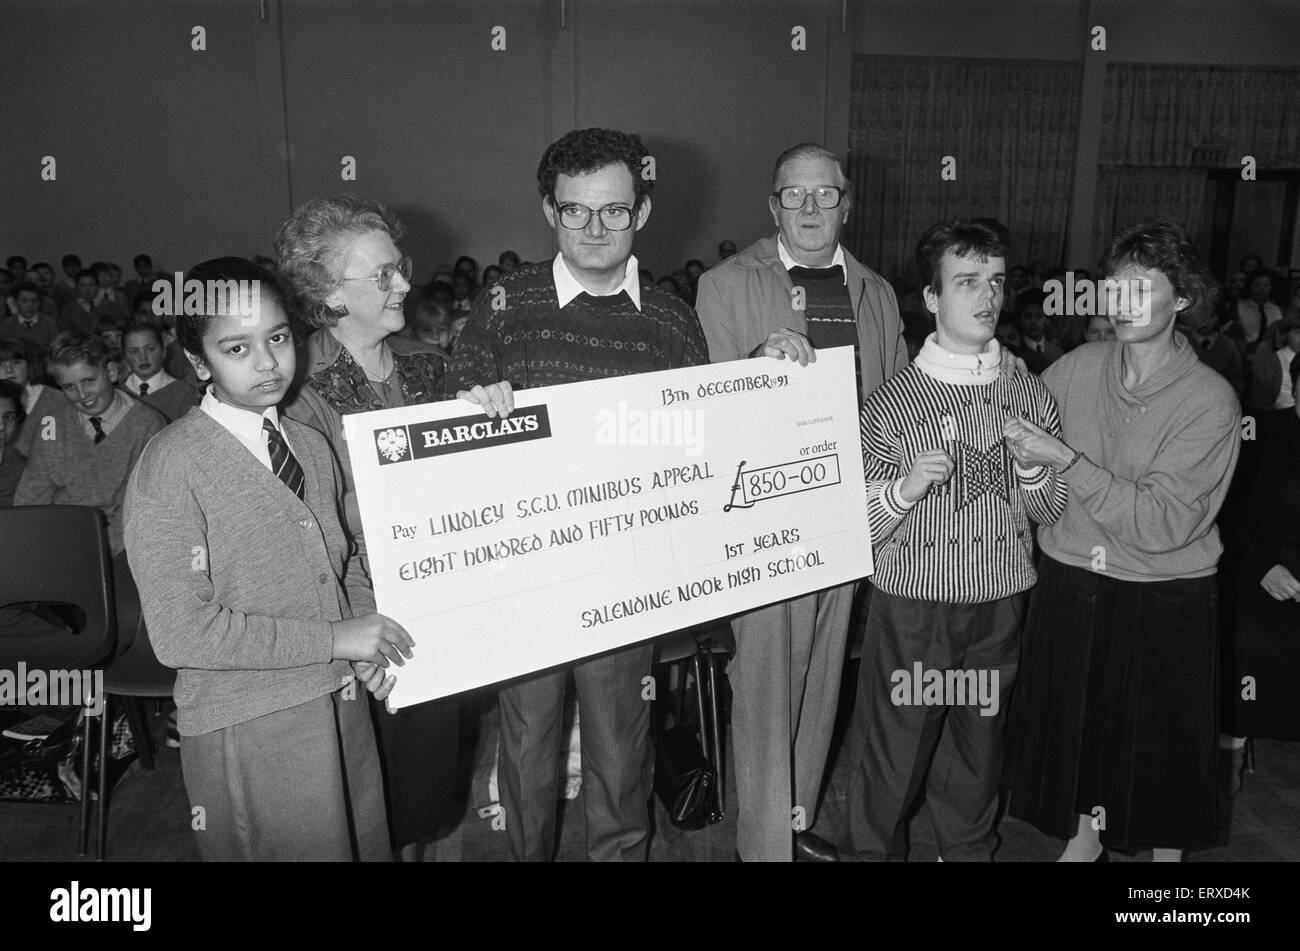 Salendine Nook High School raised £850 in a sponsored swim for a minibus appeal by Lindley Special Care Unit. 13th December 1991. Stock Photo